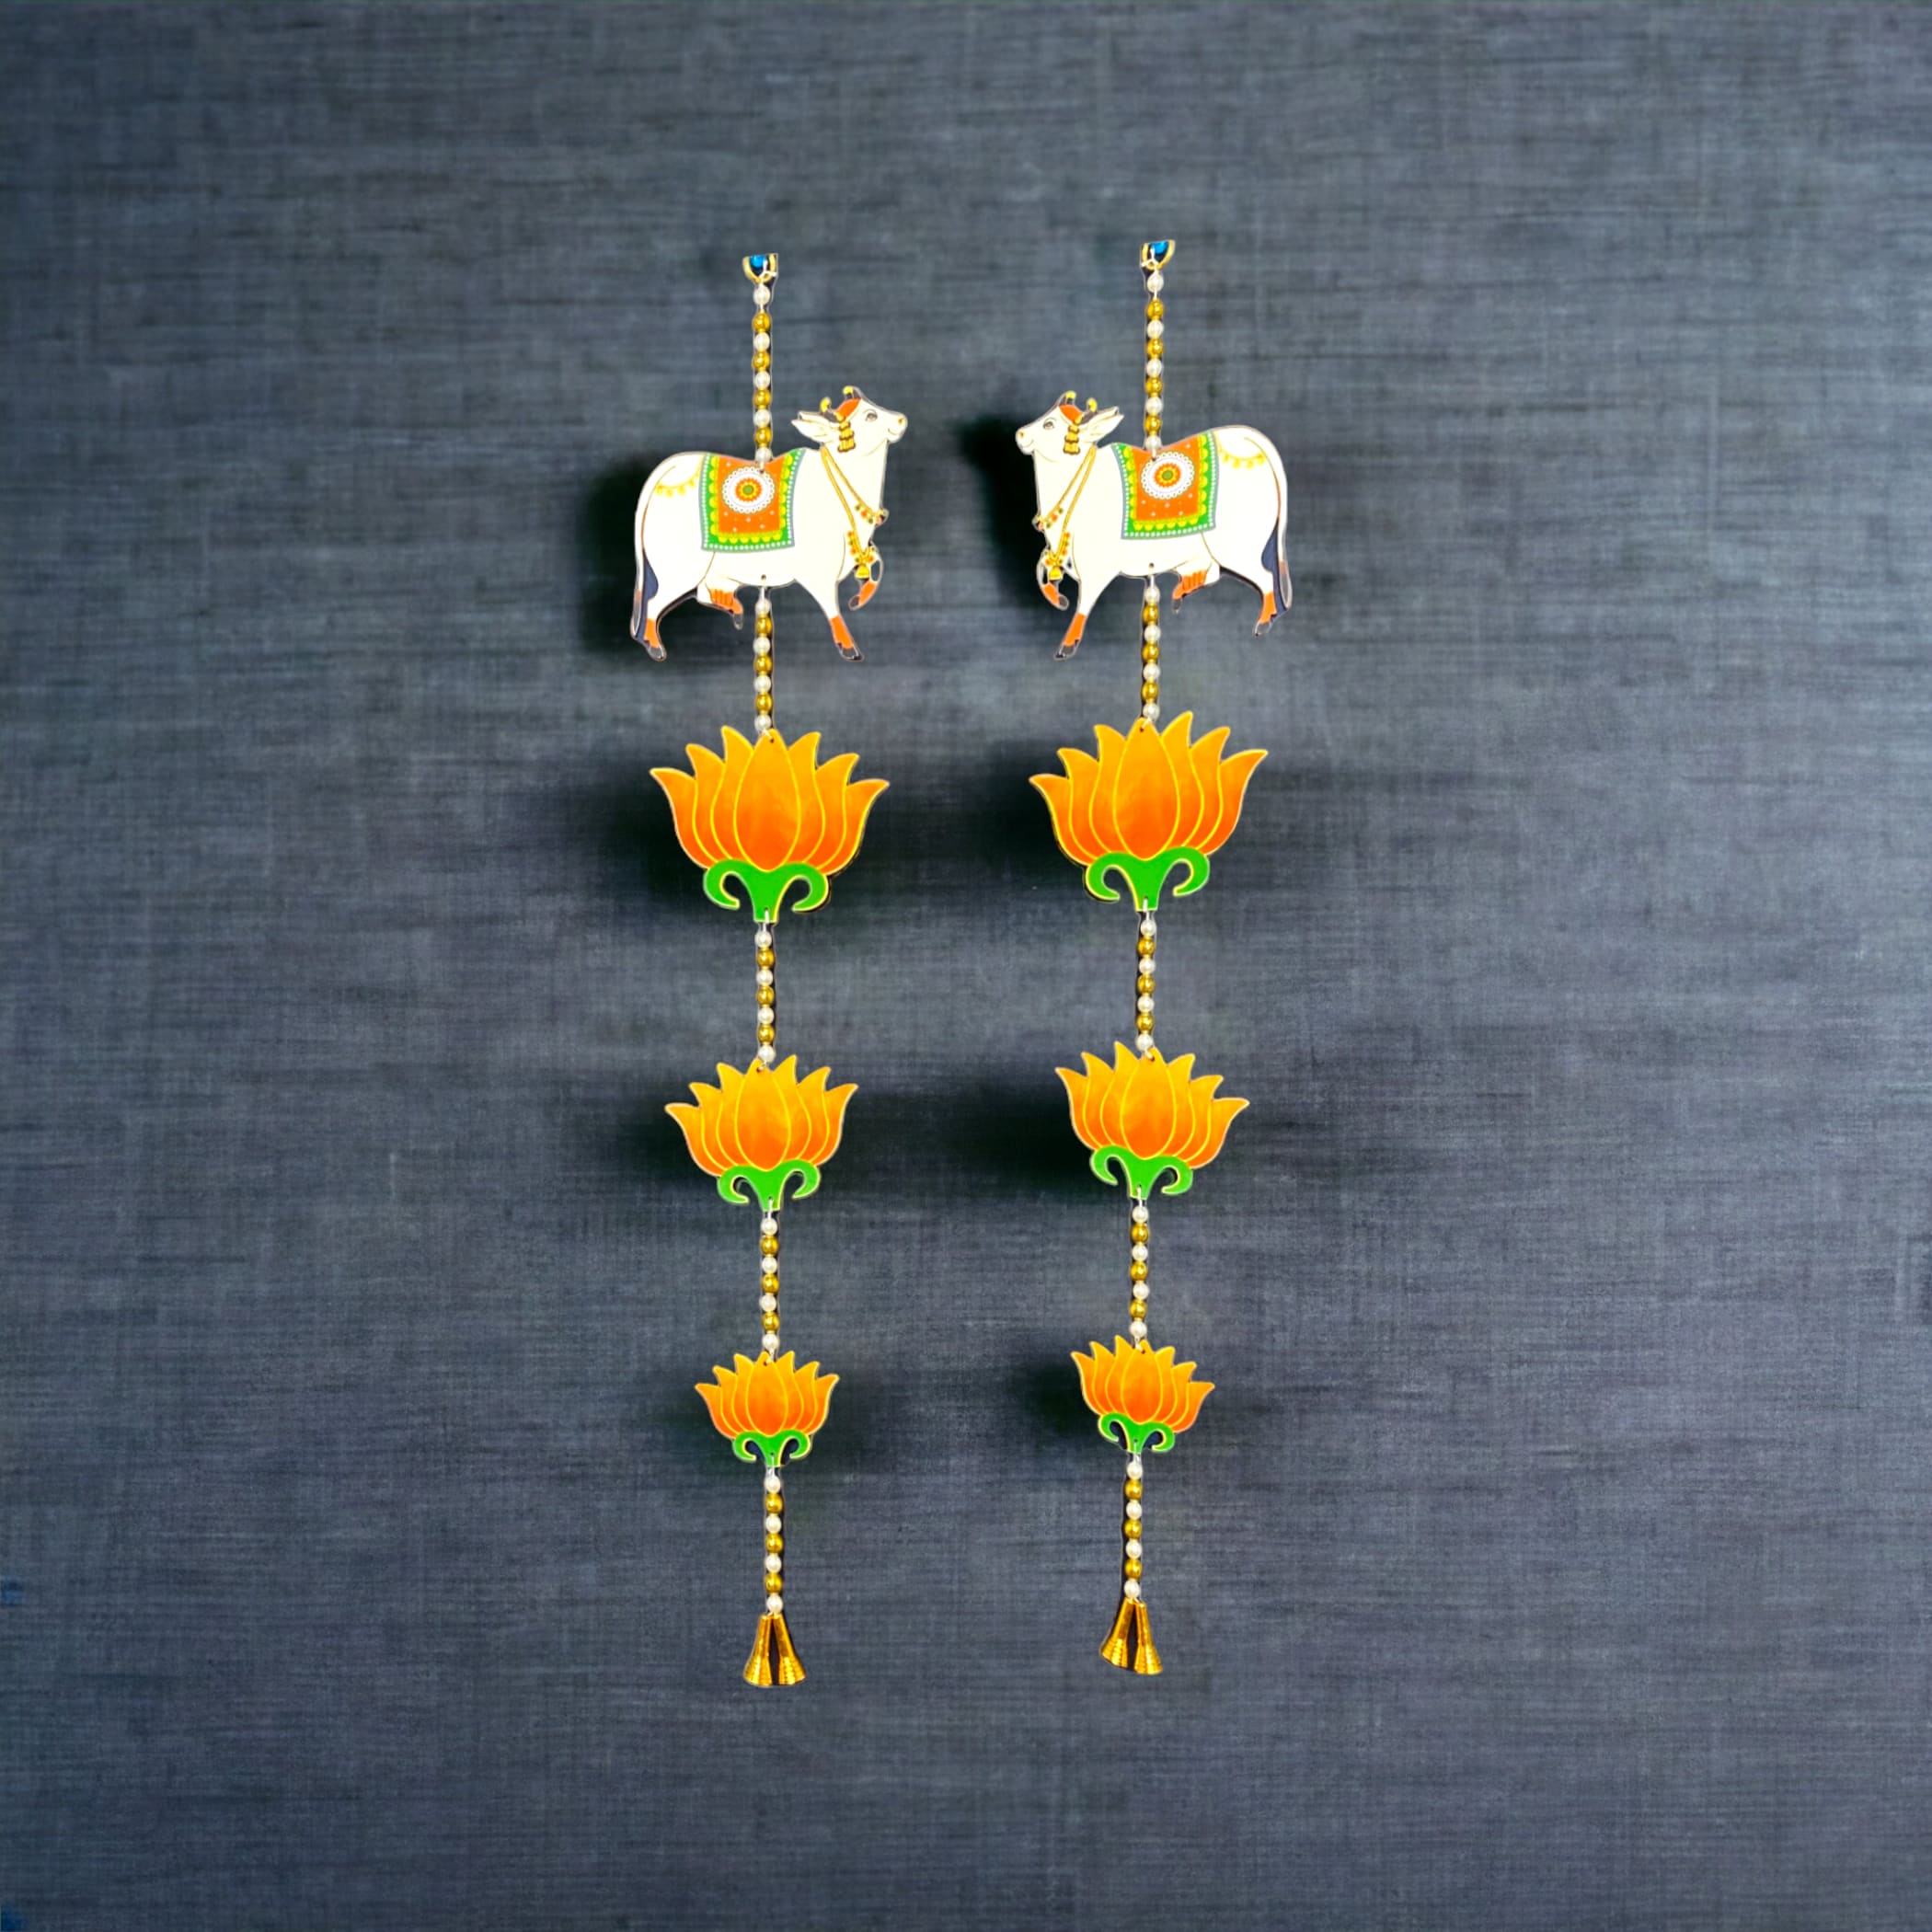 Lotus cow pair hangings for home decor backdrop hanging